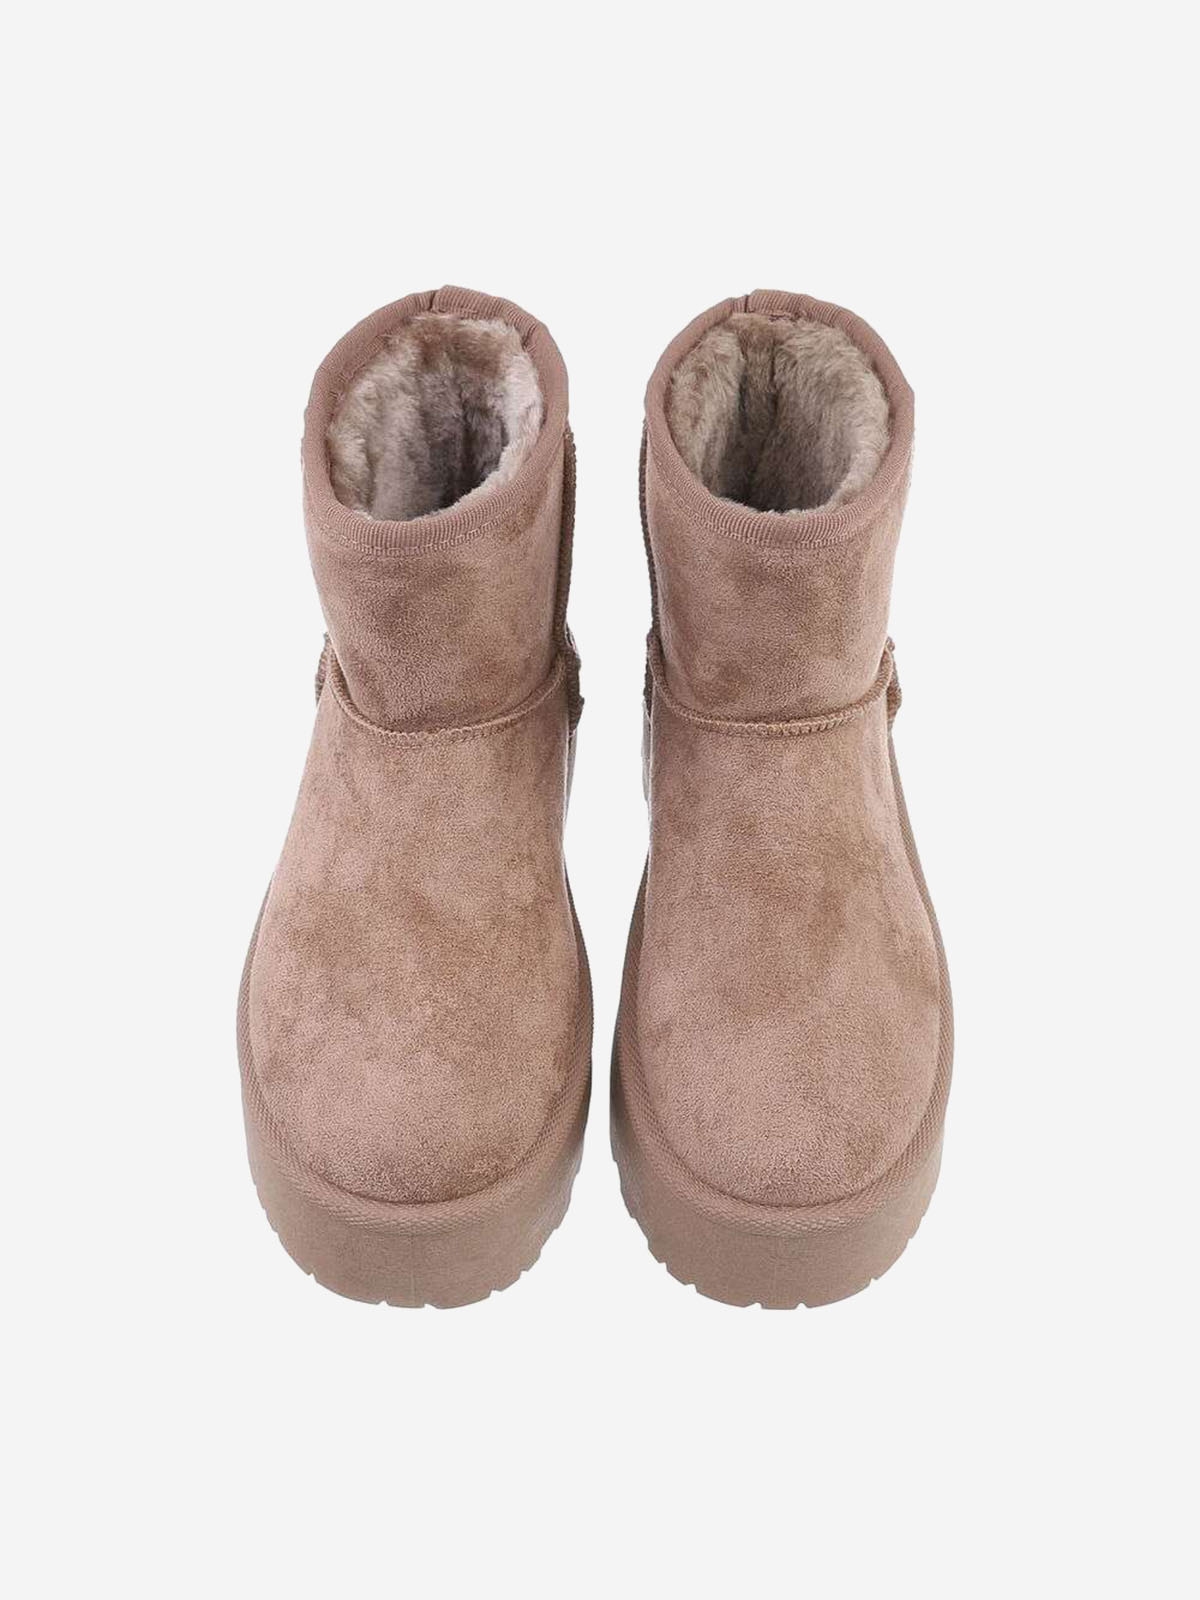 UGG type women's ankle shoes with platform in beige